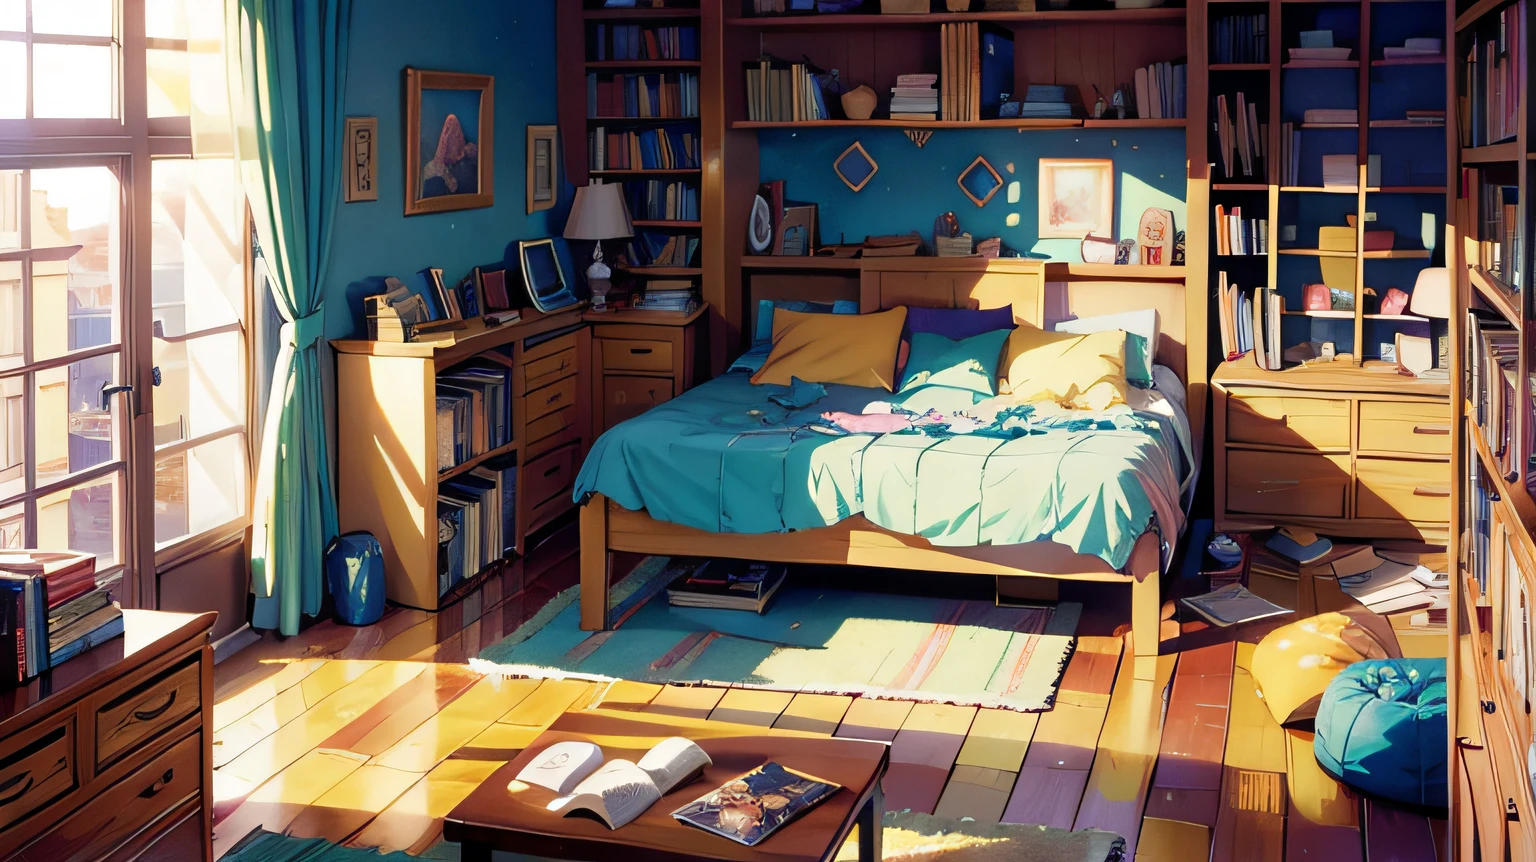 teenager&#39;s room with bed, computer, books and a window at night in the moonlight